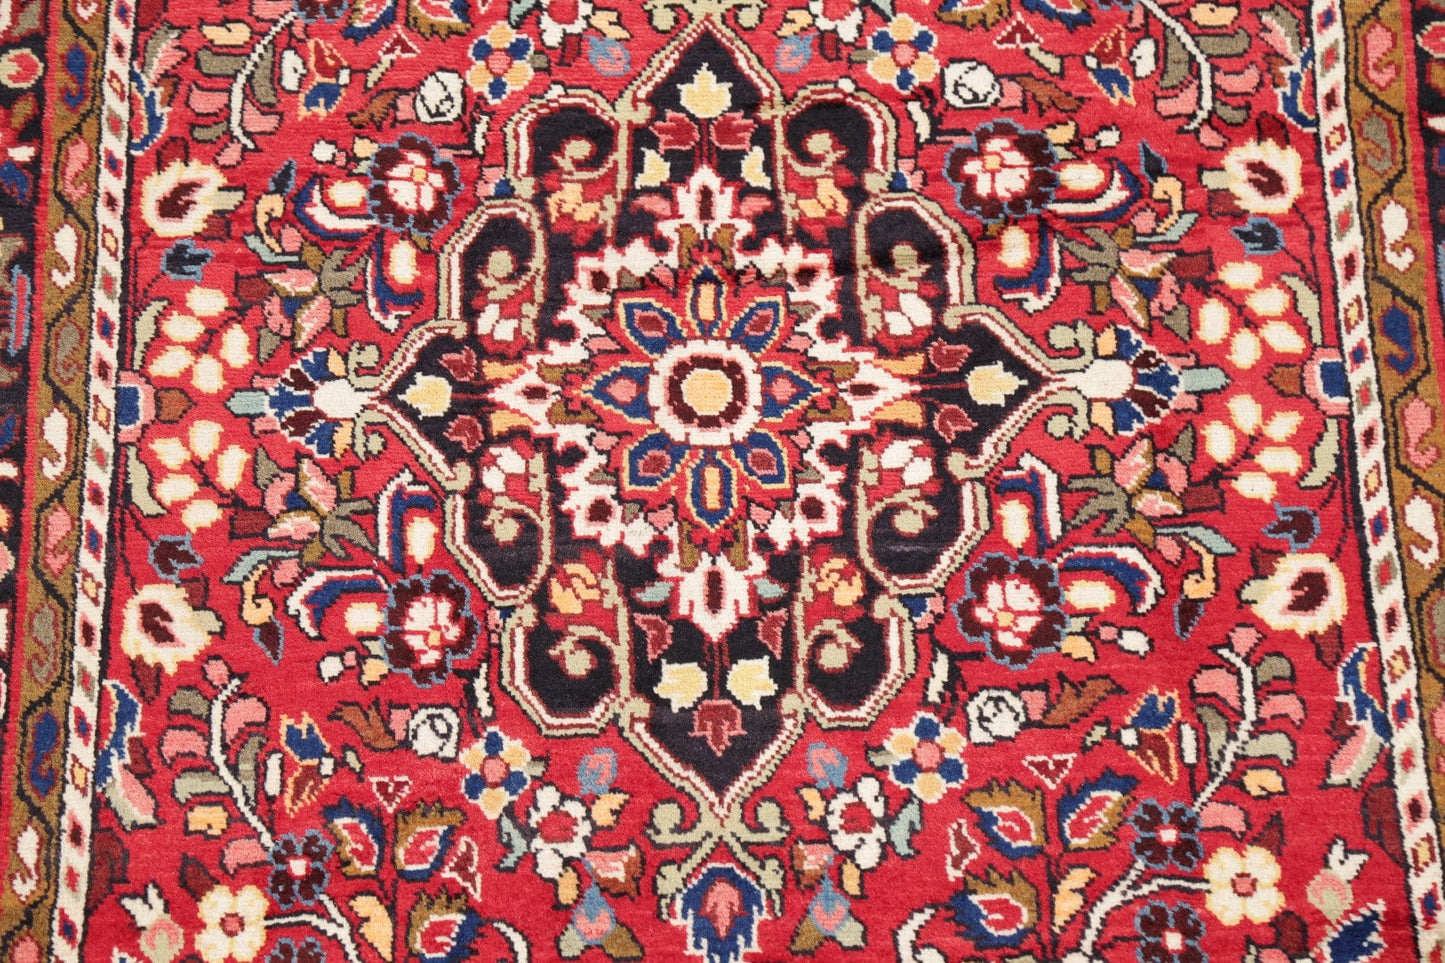 Floral Red Borchelu Persian Area Rug 5x10